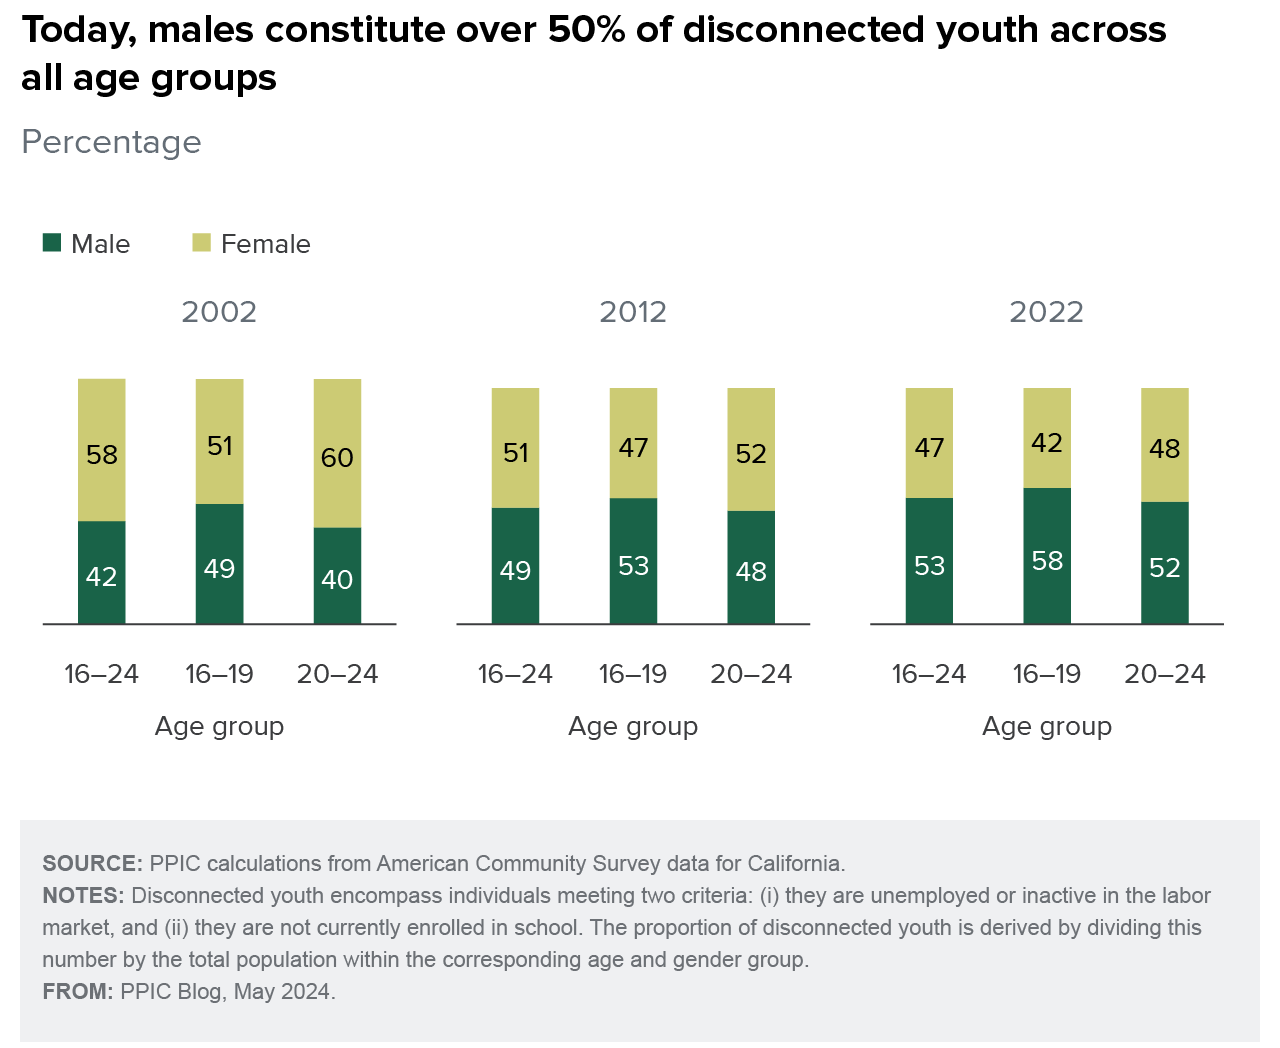 figure - Today, males constitute over 50% of disconnected youth across all age groups